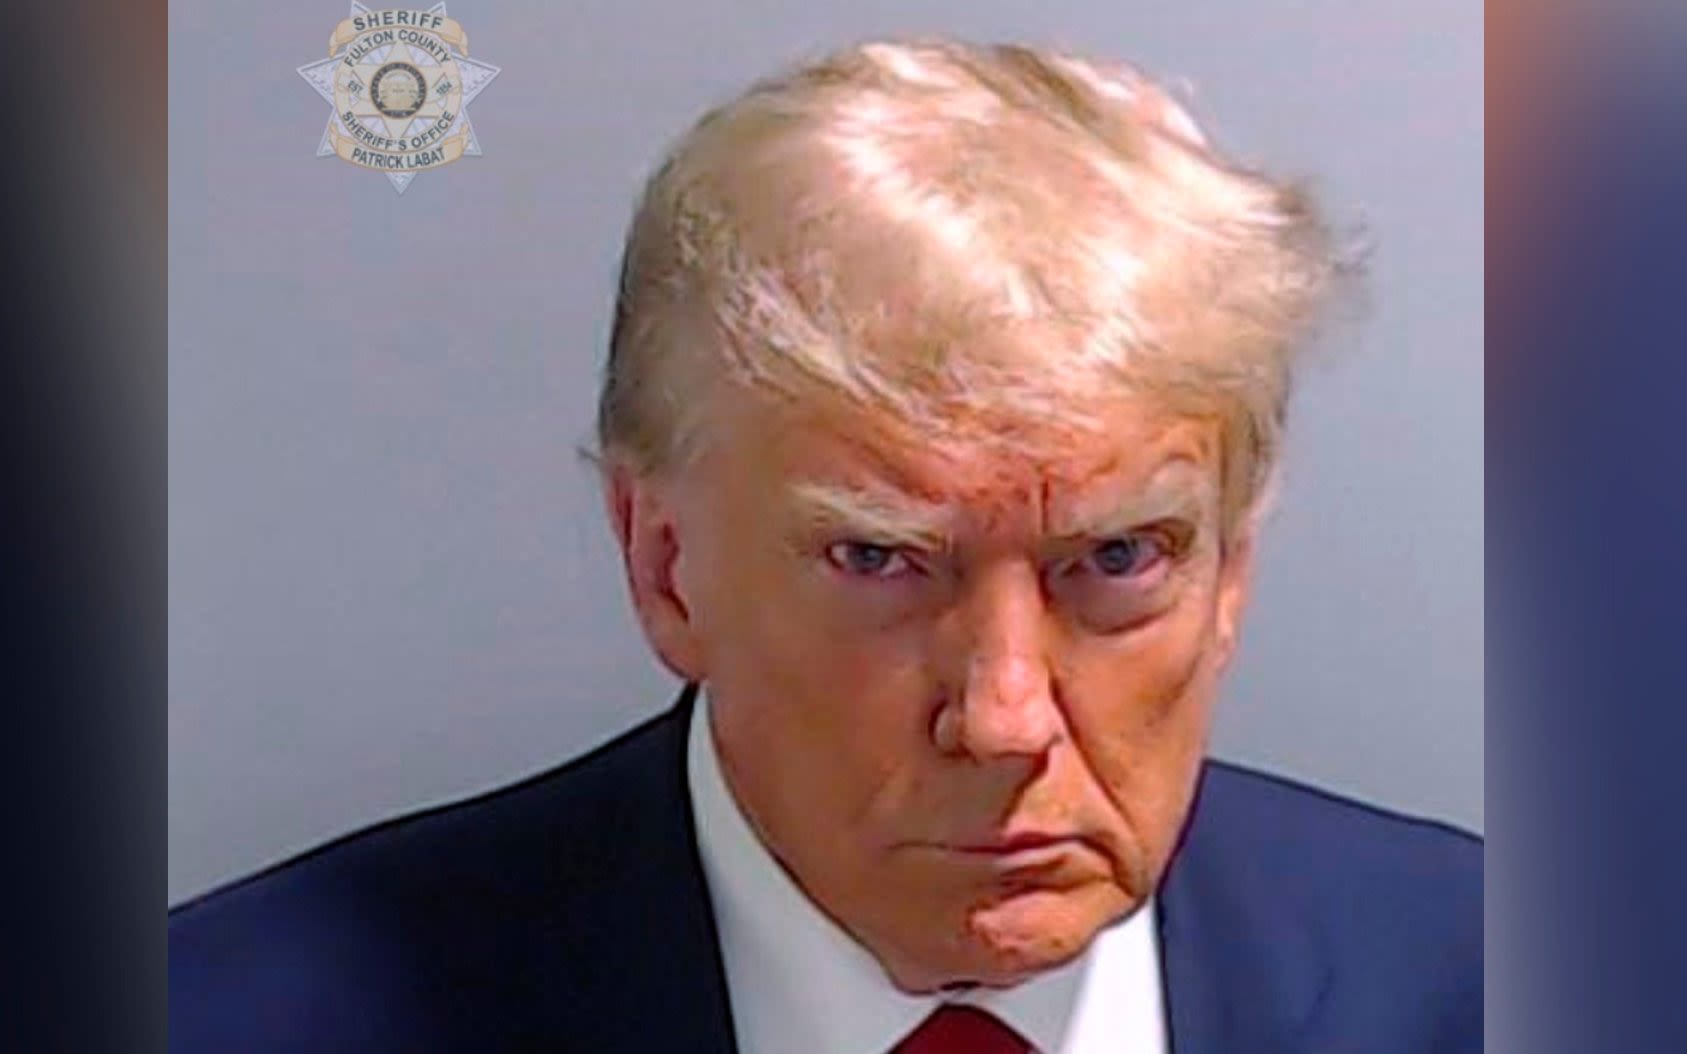 Could Donald Trump now go to prison?